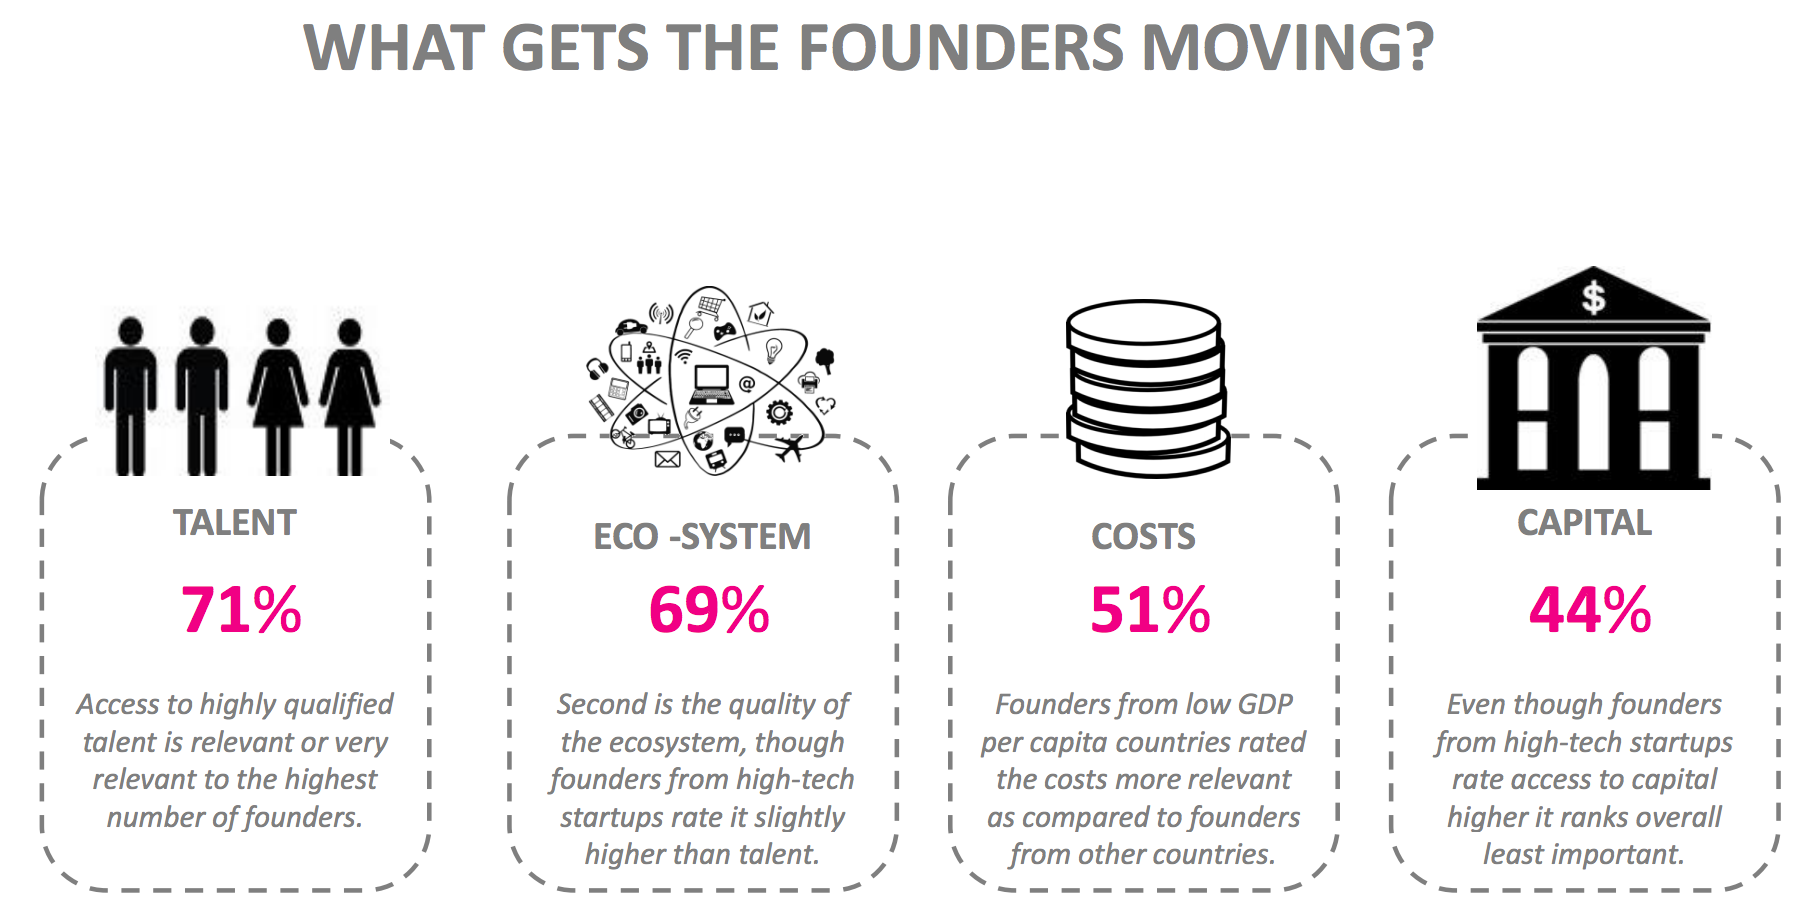 What get's startup founders moving?